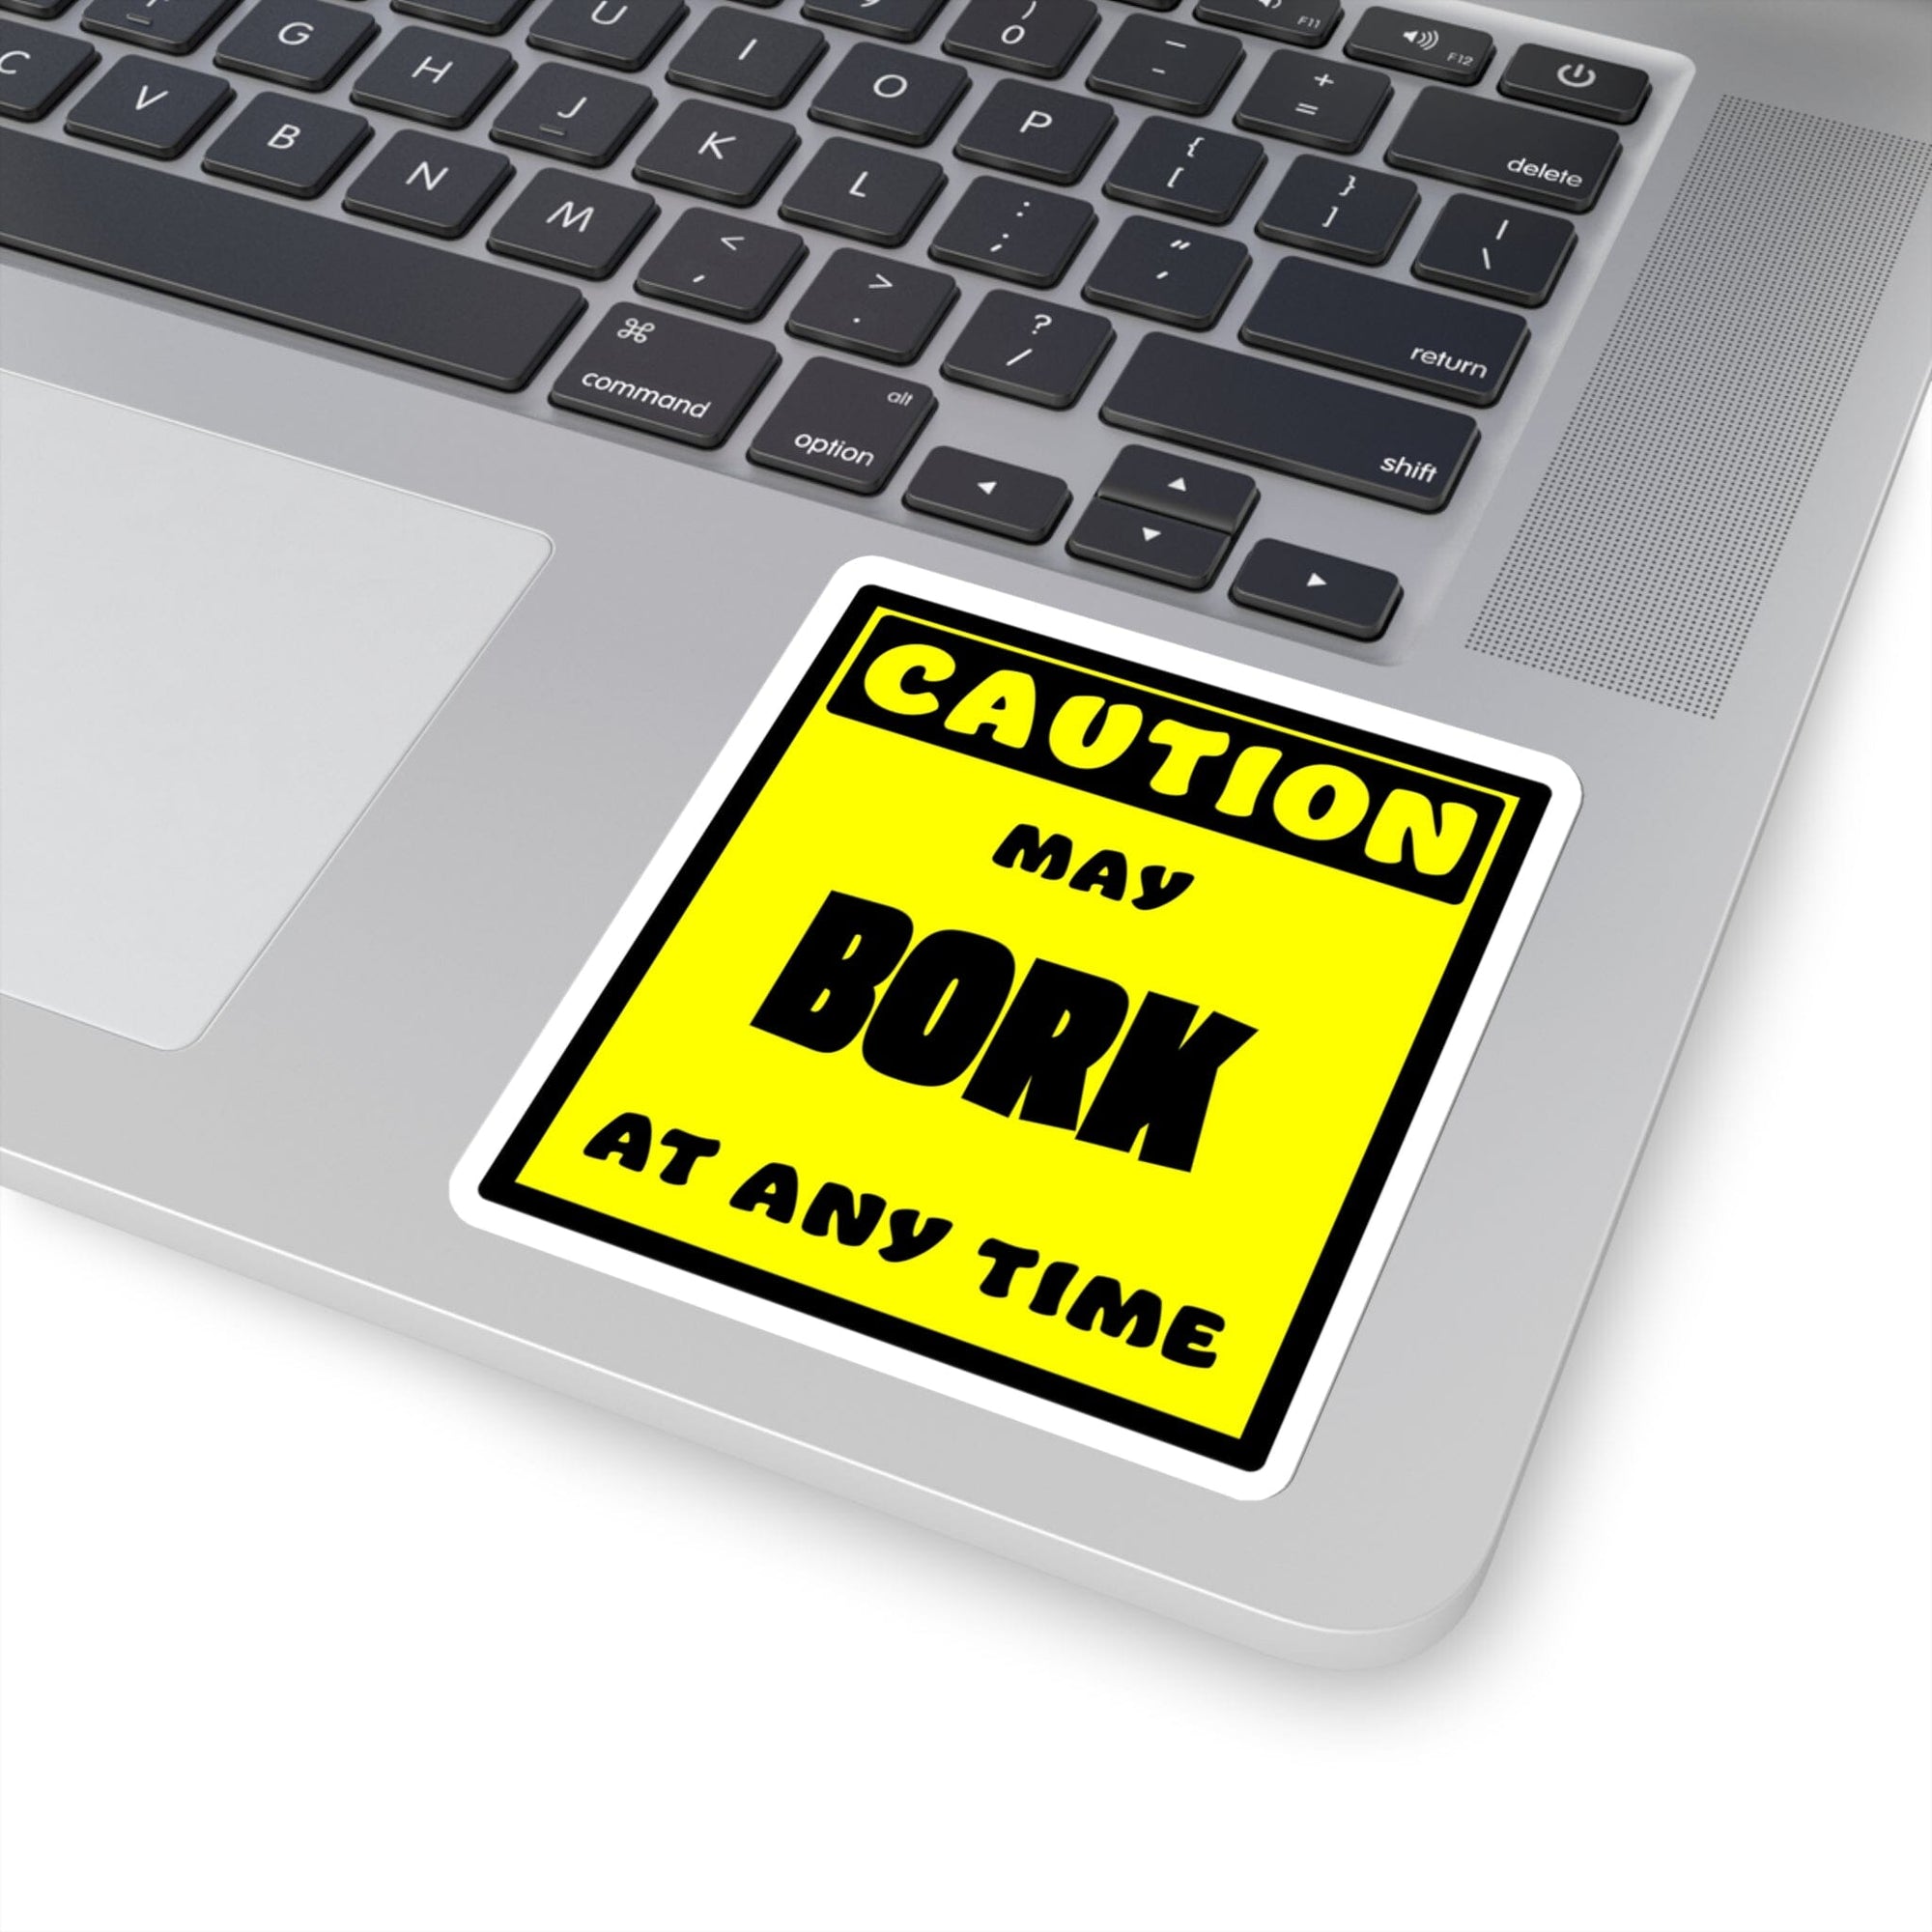 CAUTION! May BORK at any time! - Sticker Sticker AFLT-Whootorca 